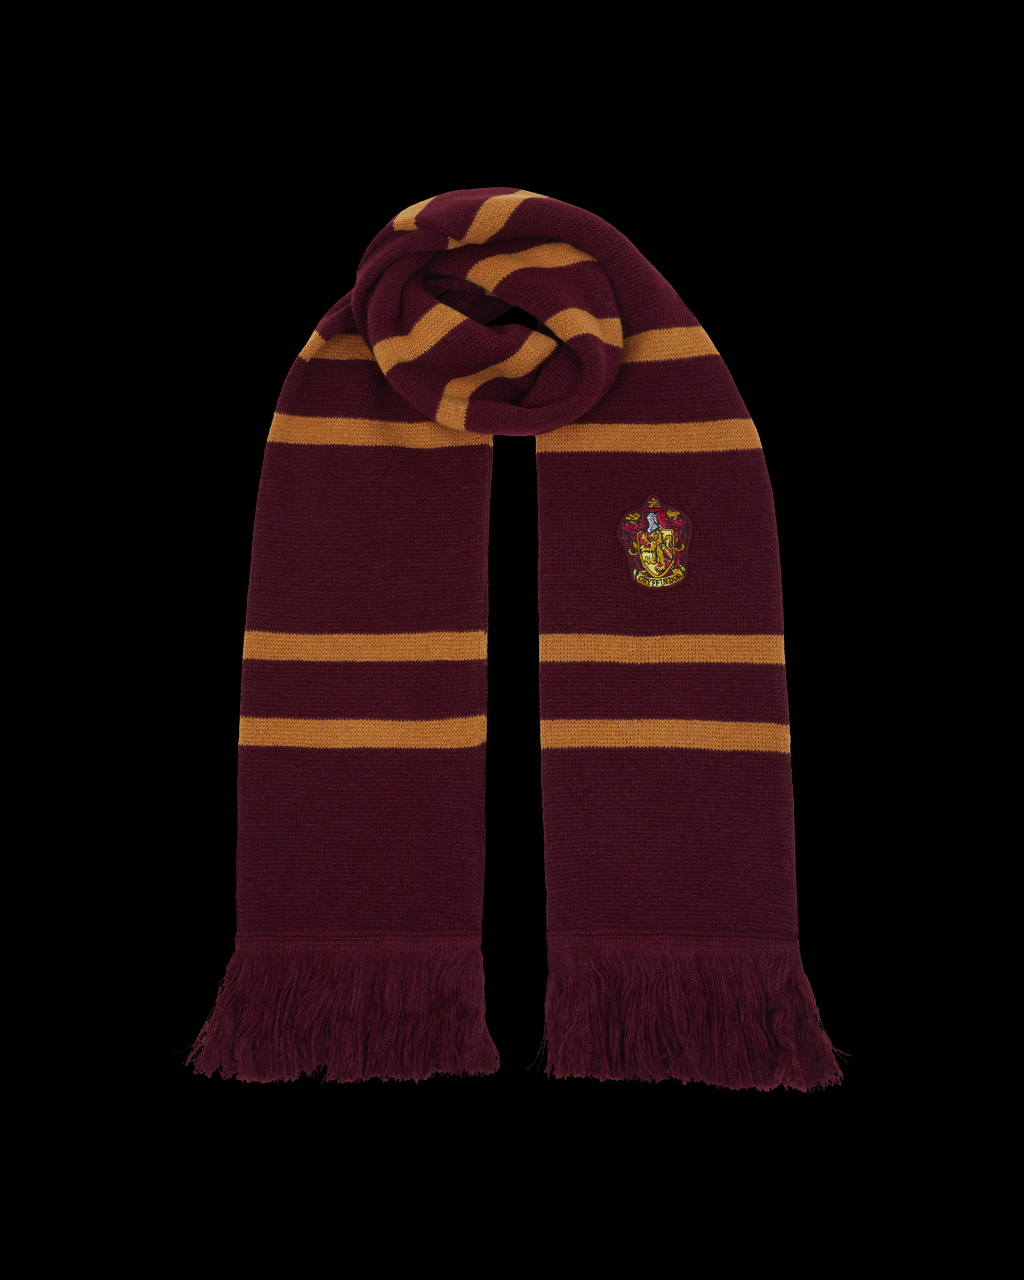 Picture of: Gryffindor Knitted Crest Scarf  Harry Potter Shop US